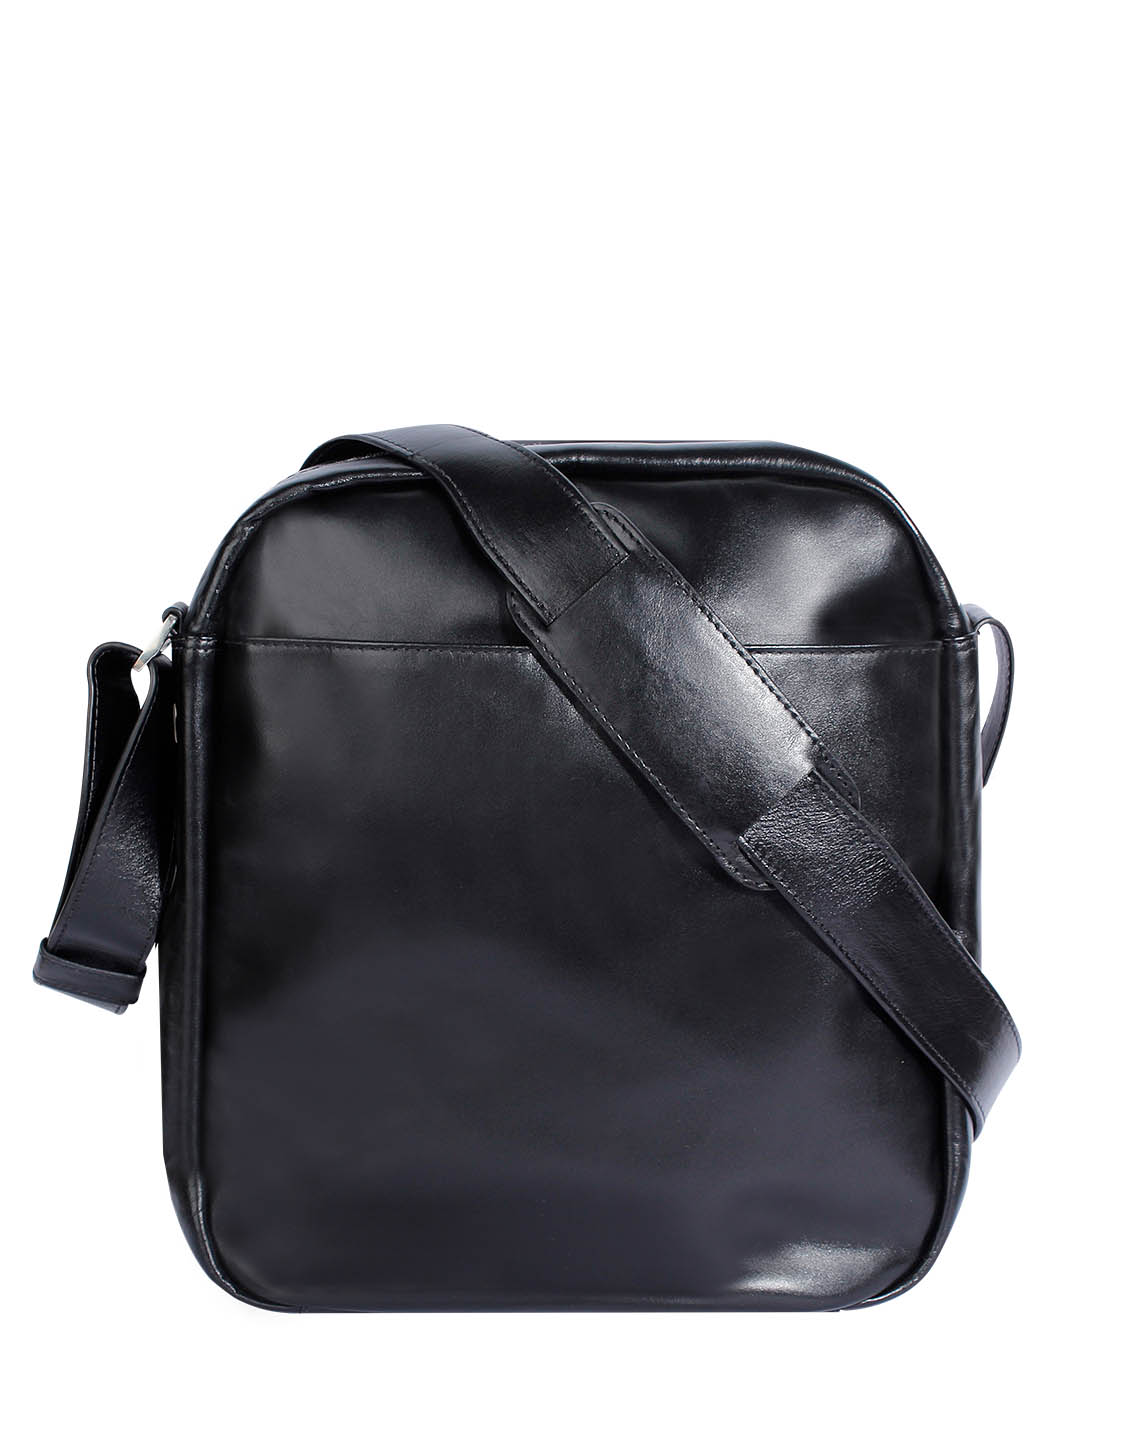 Morral MH-20 Color Negro